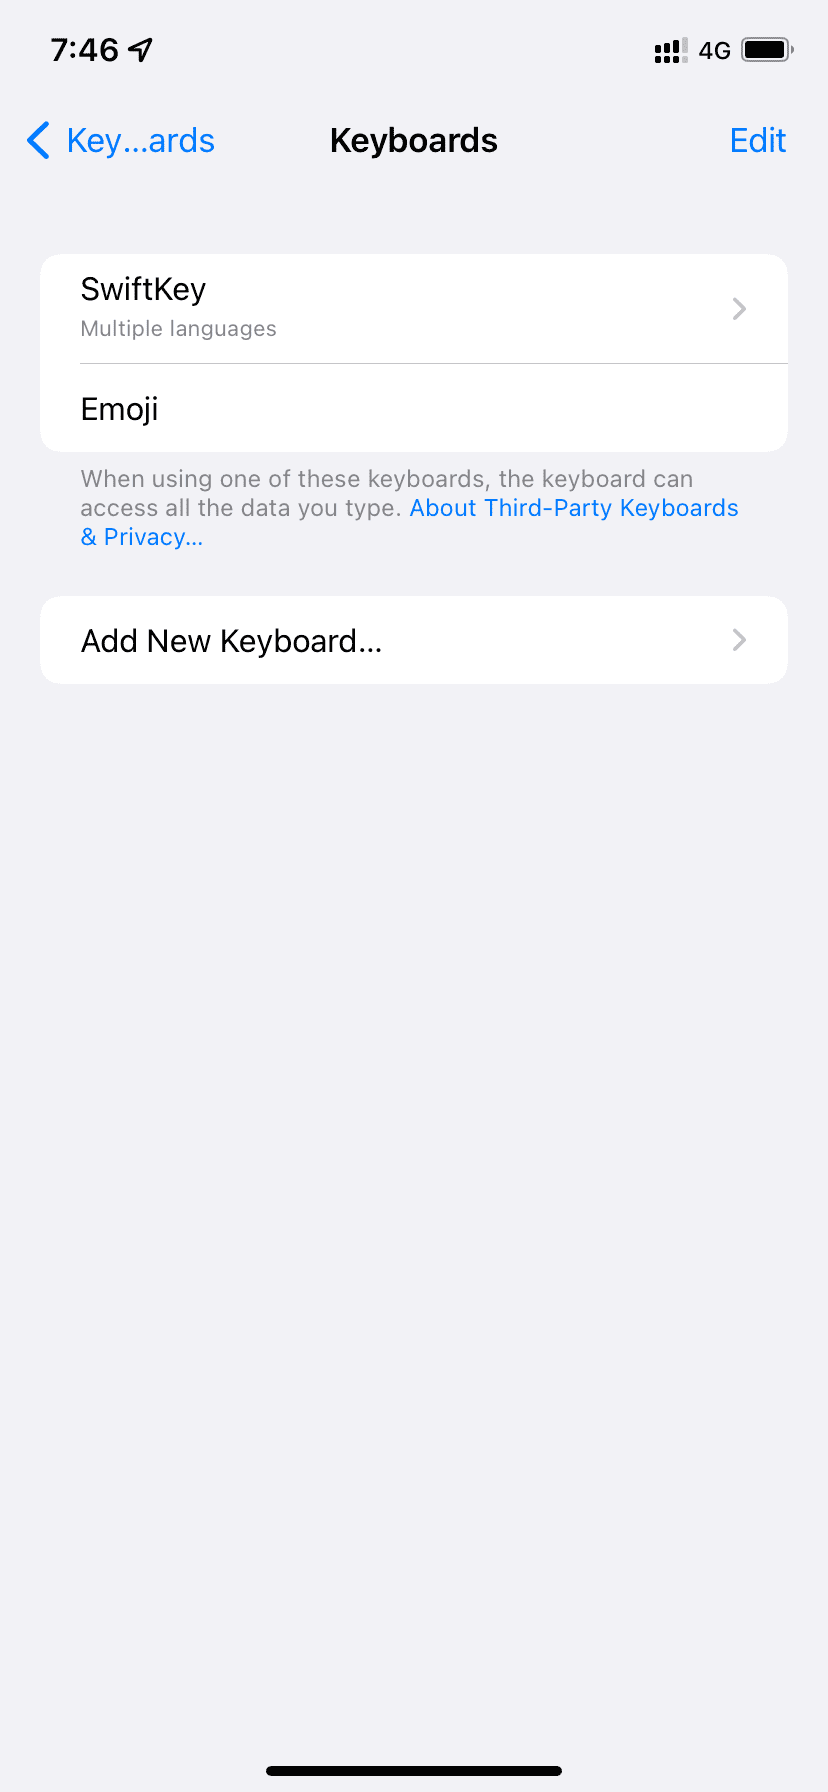 Only a third-party keyboard added to iPhone